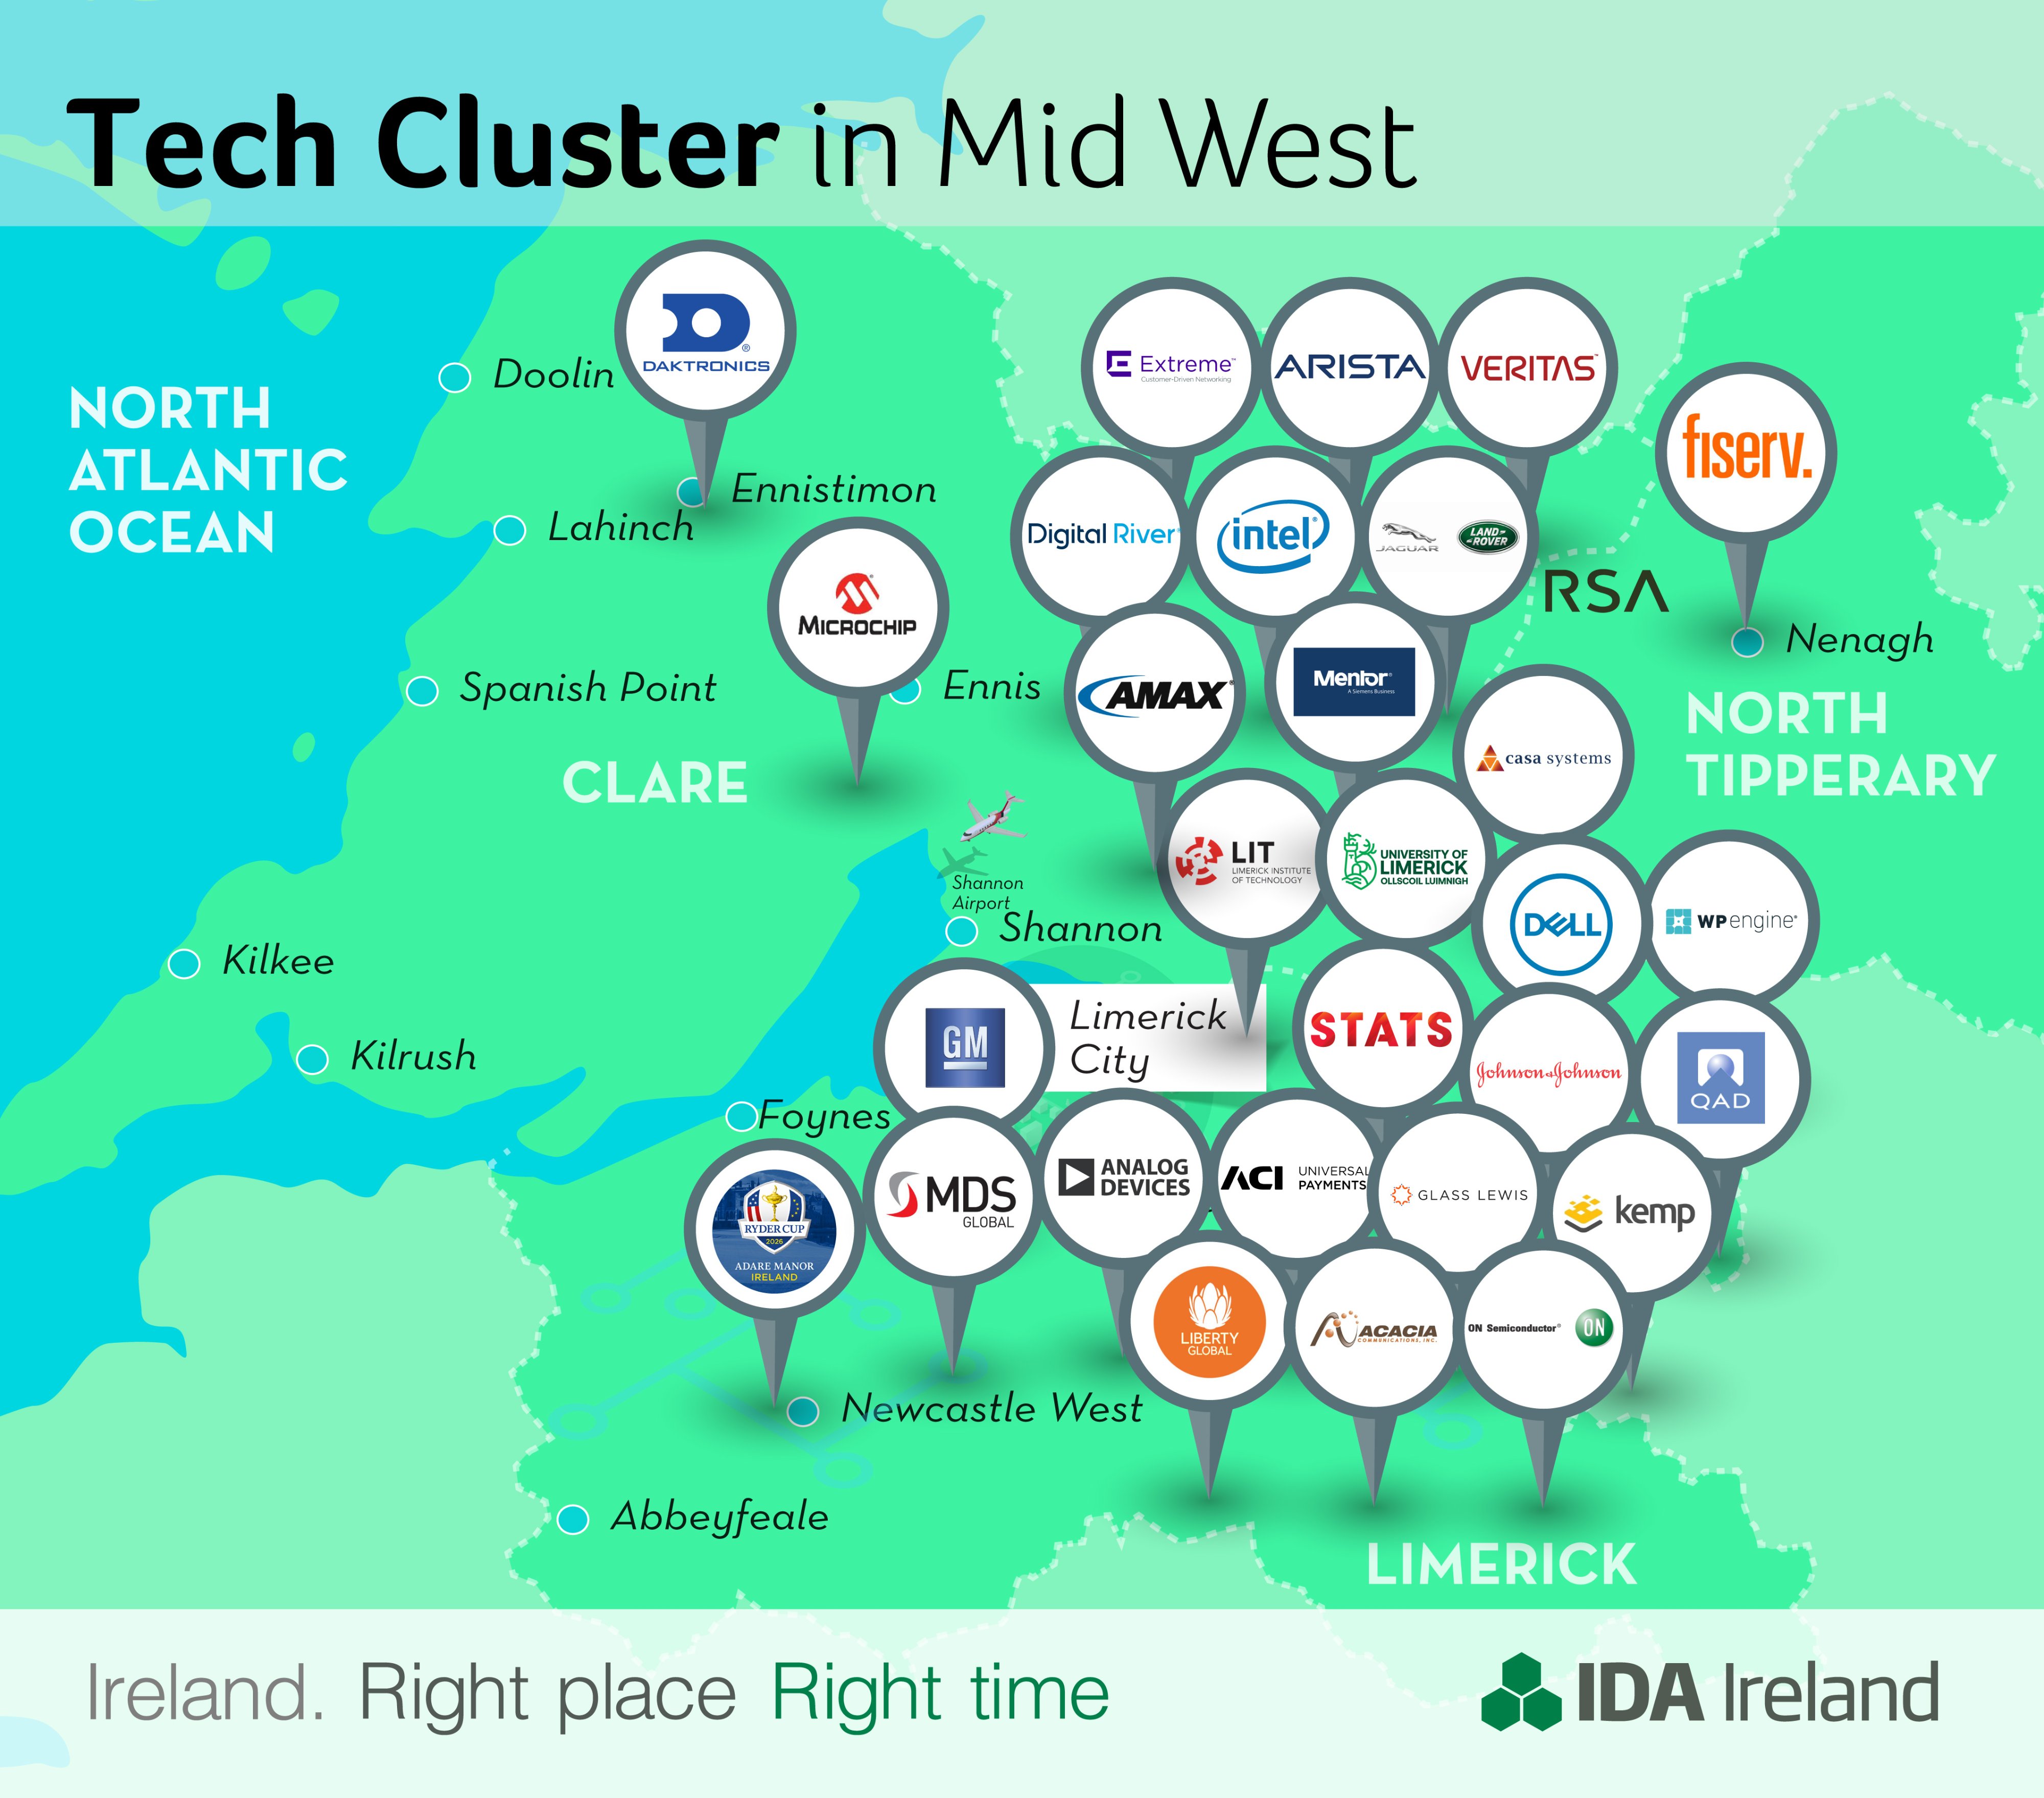 Tech Cluster Map of the Mid West